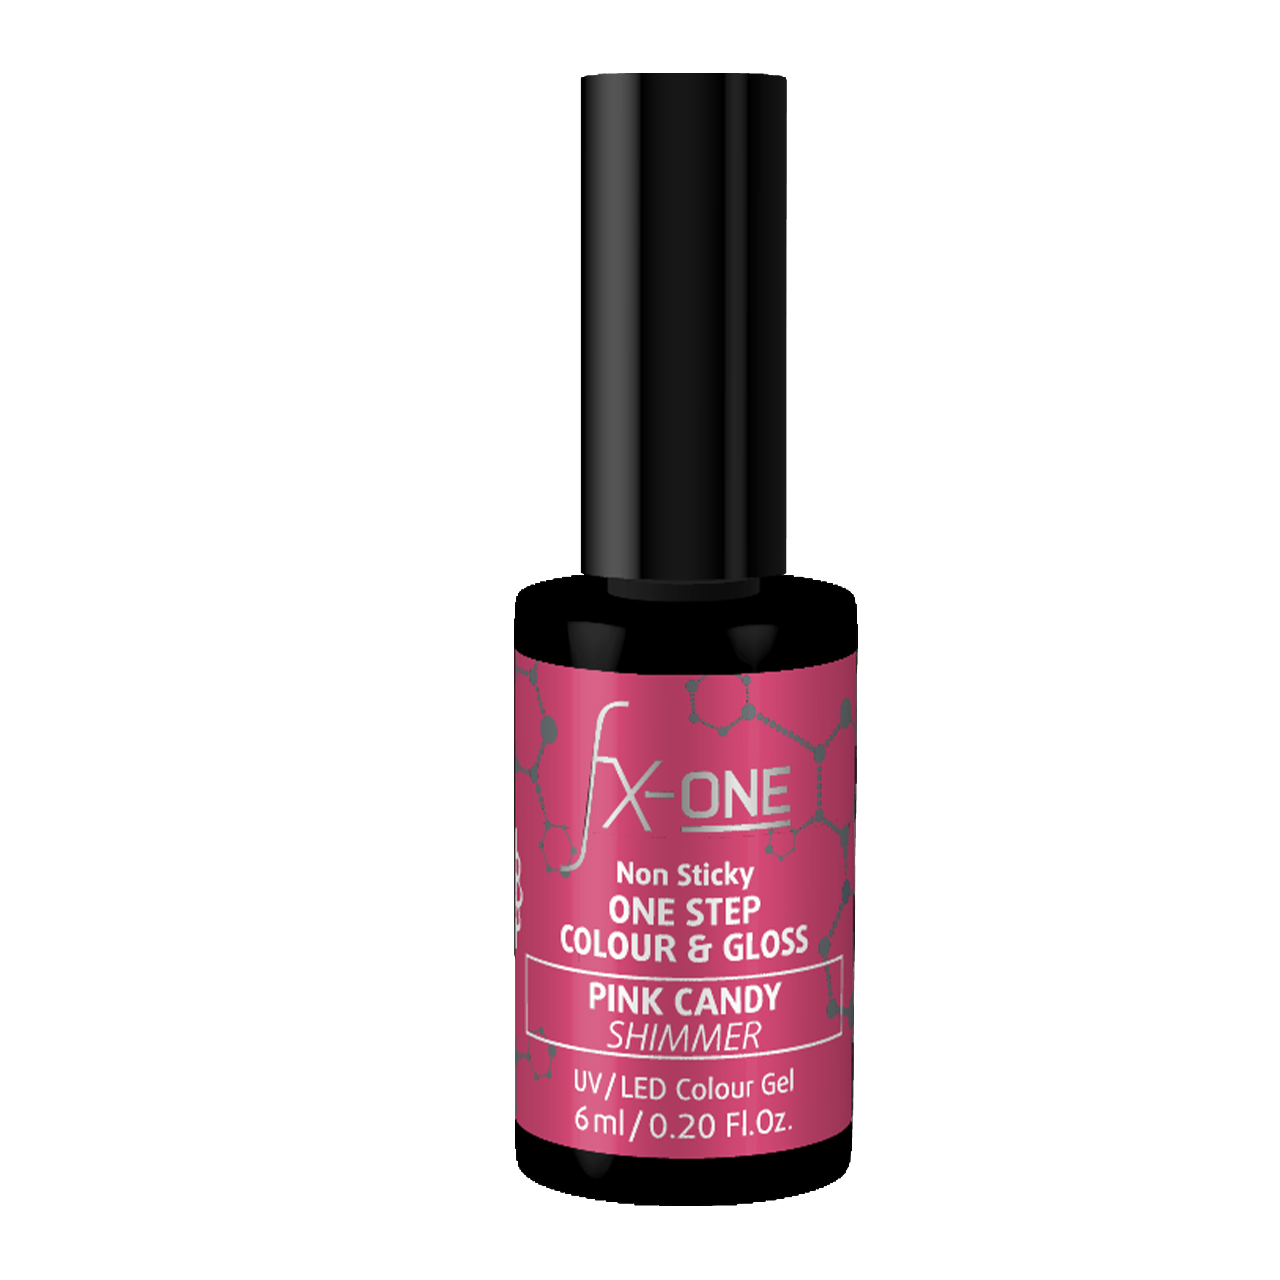 FX-ONE Colour & Gloss Pink Candy 6ml